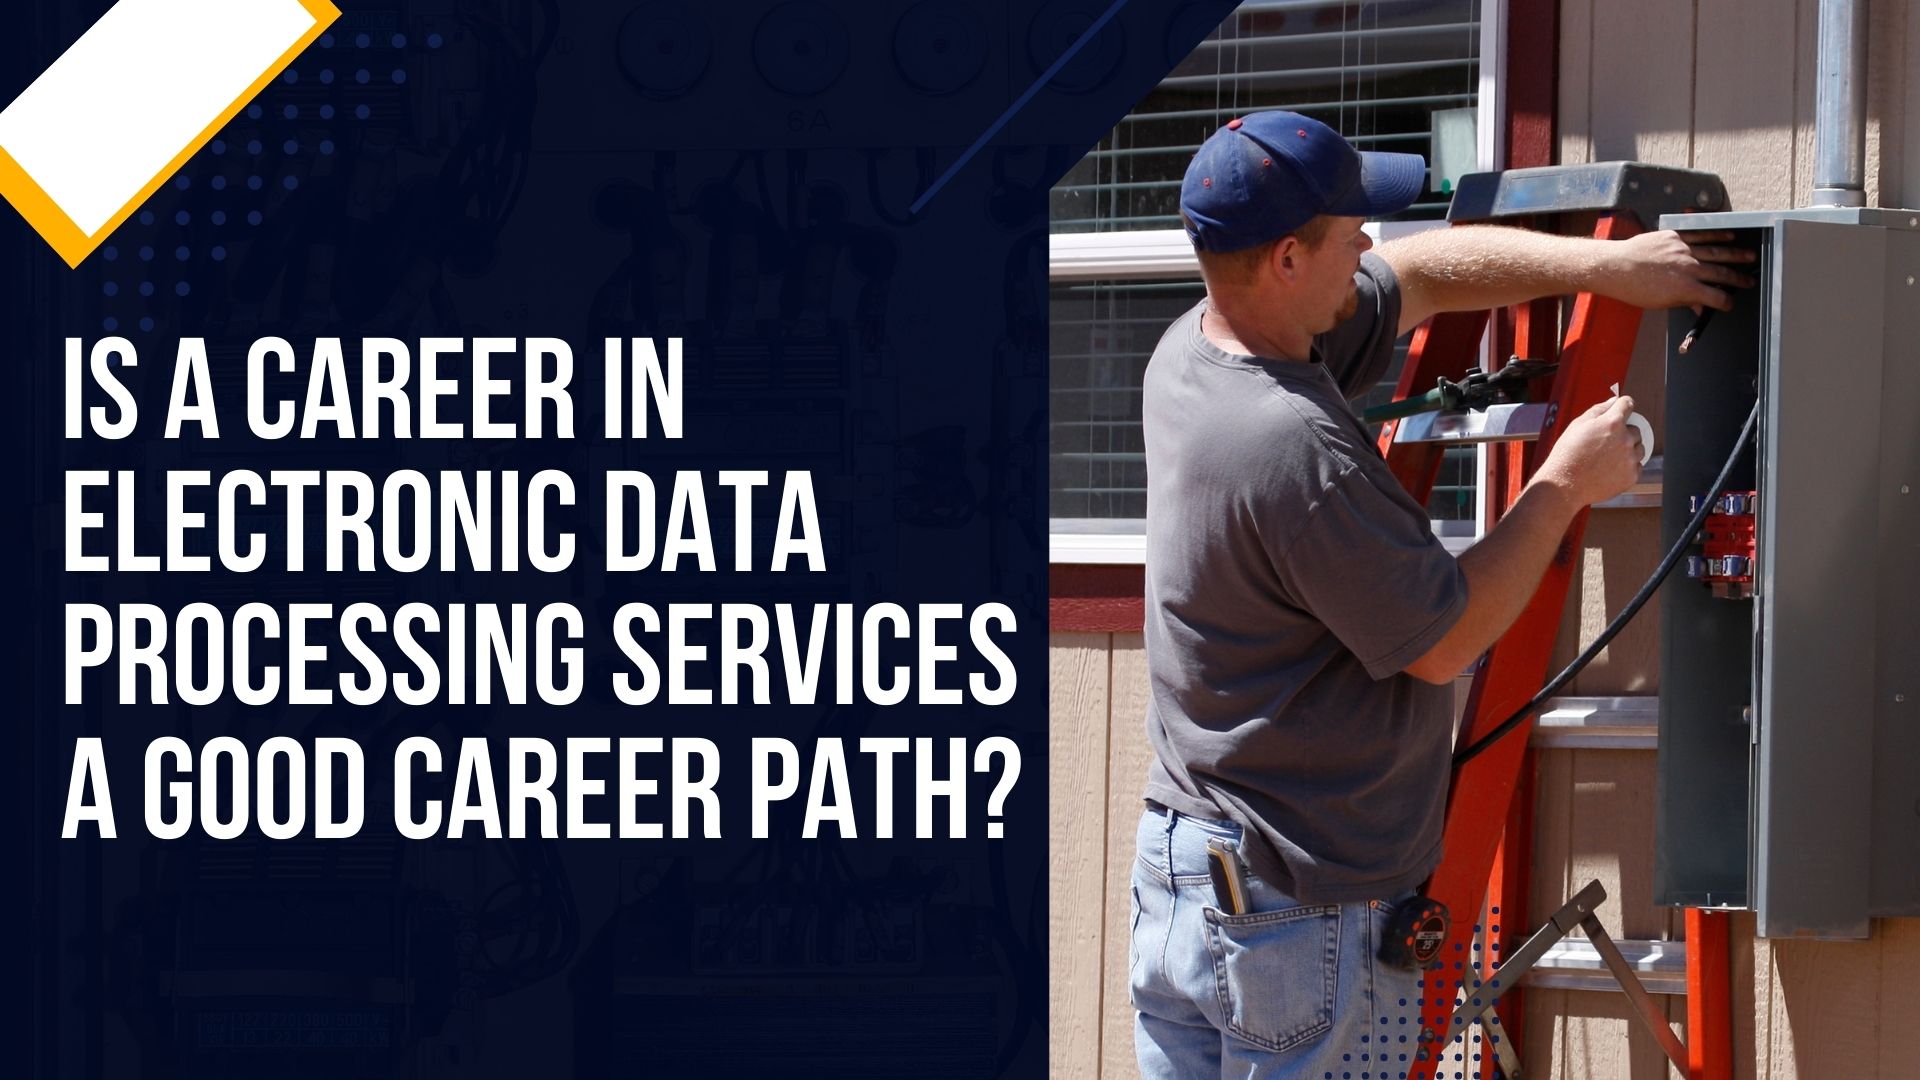 Is a Career in Electronic Data Processing Services a Good Career Path?